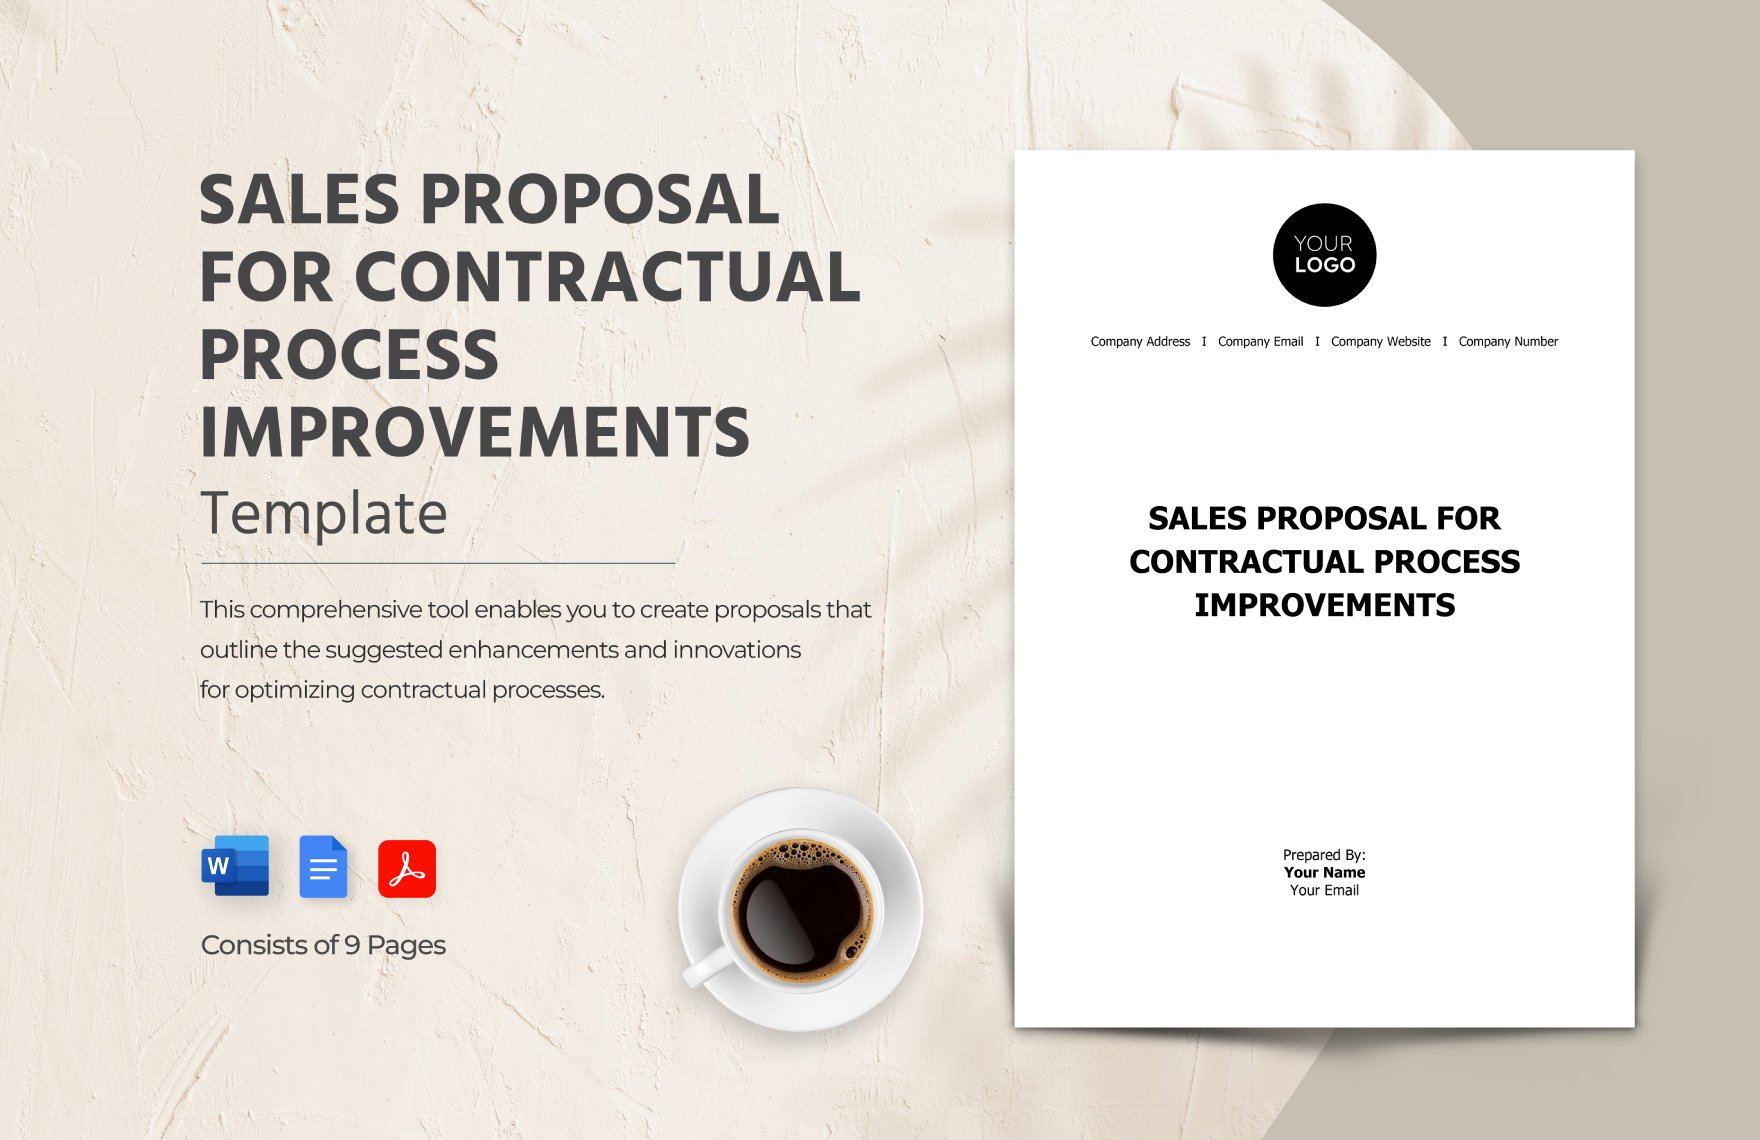 Sales Proposal for Contractual Process Improvements Template